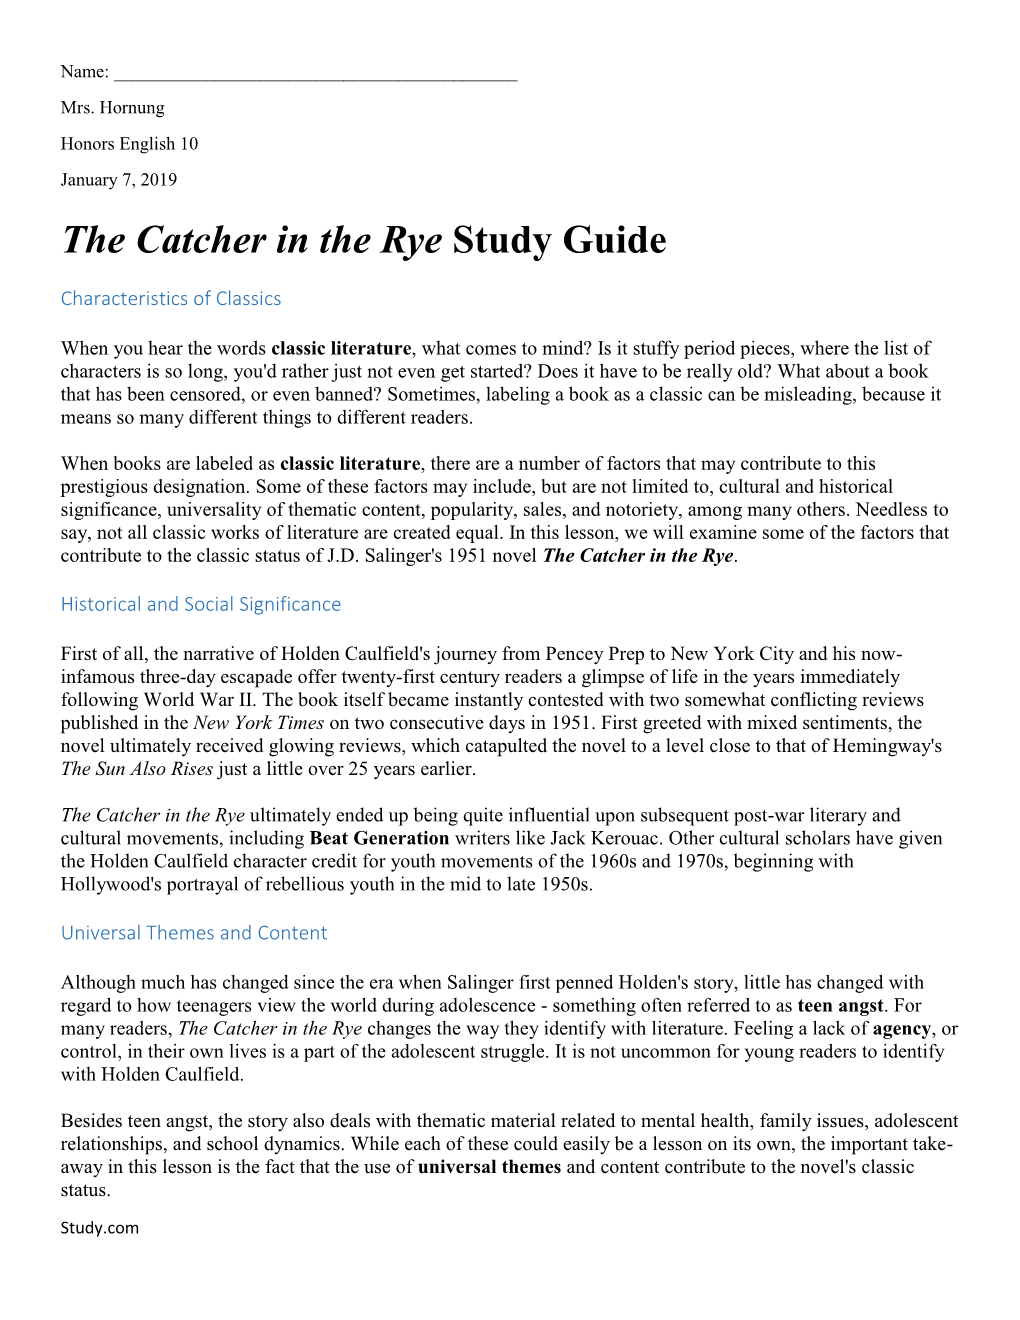 The Catcher in the Rye Study Guide